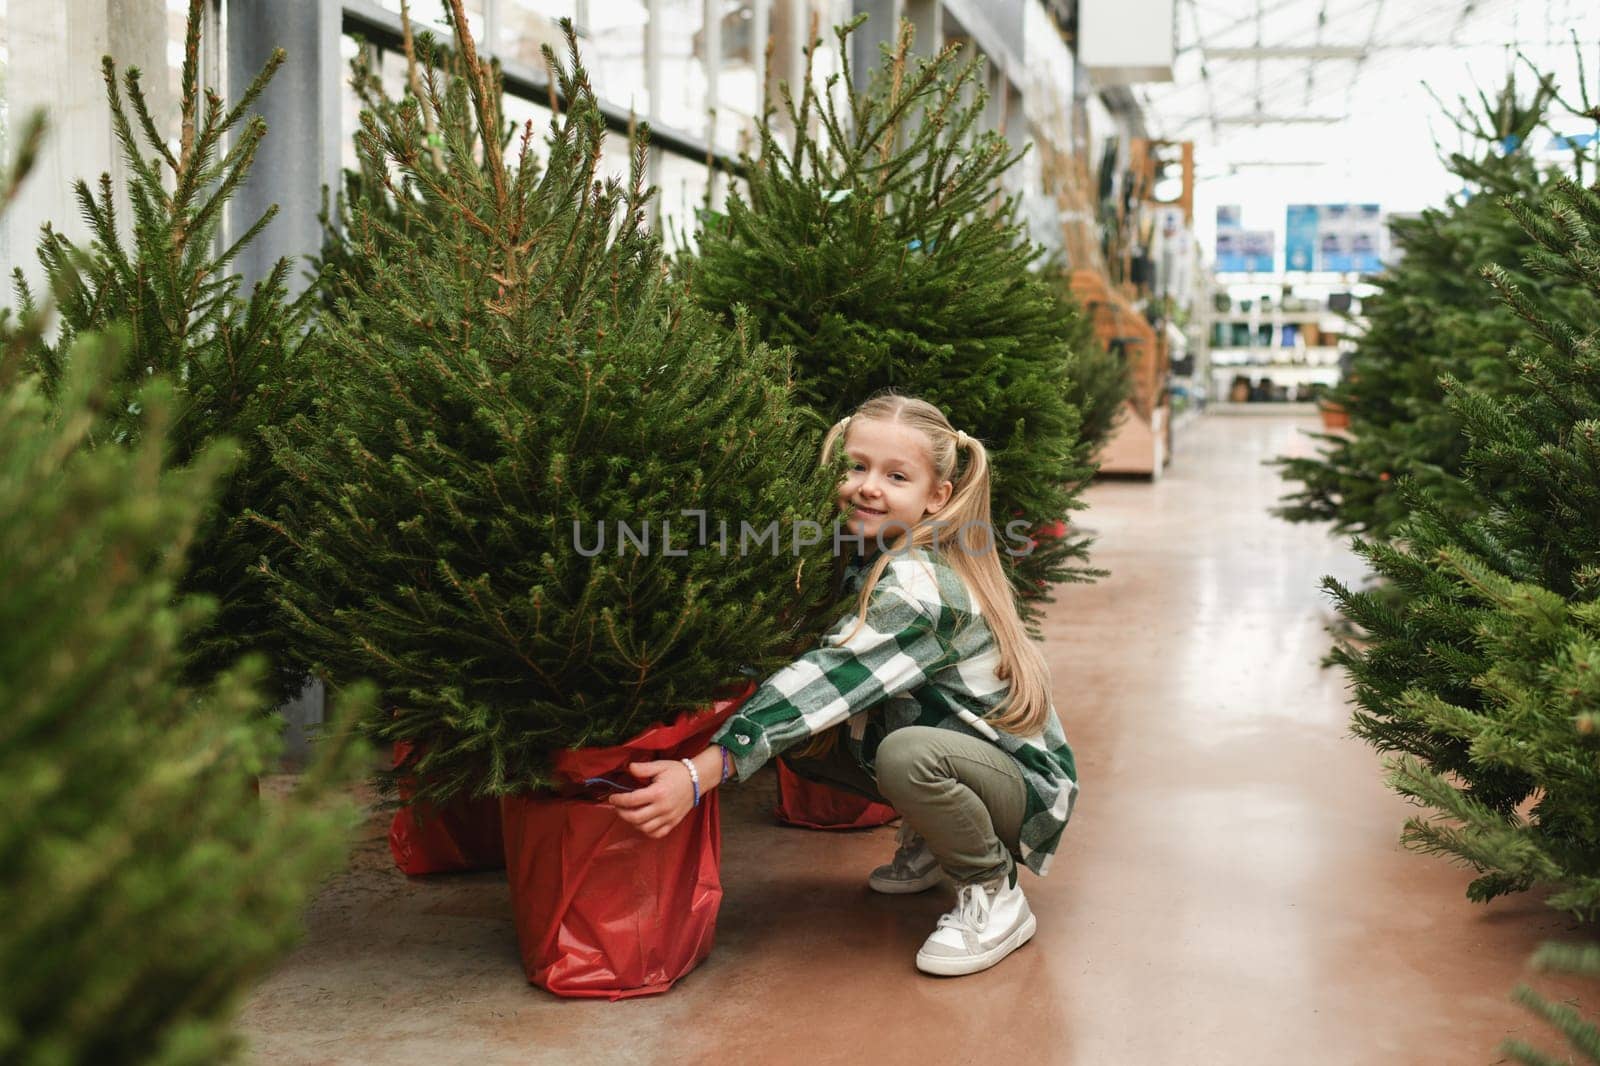 A small girl chooses a Christmas tree in the market.